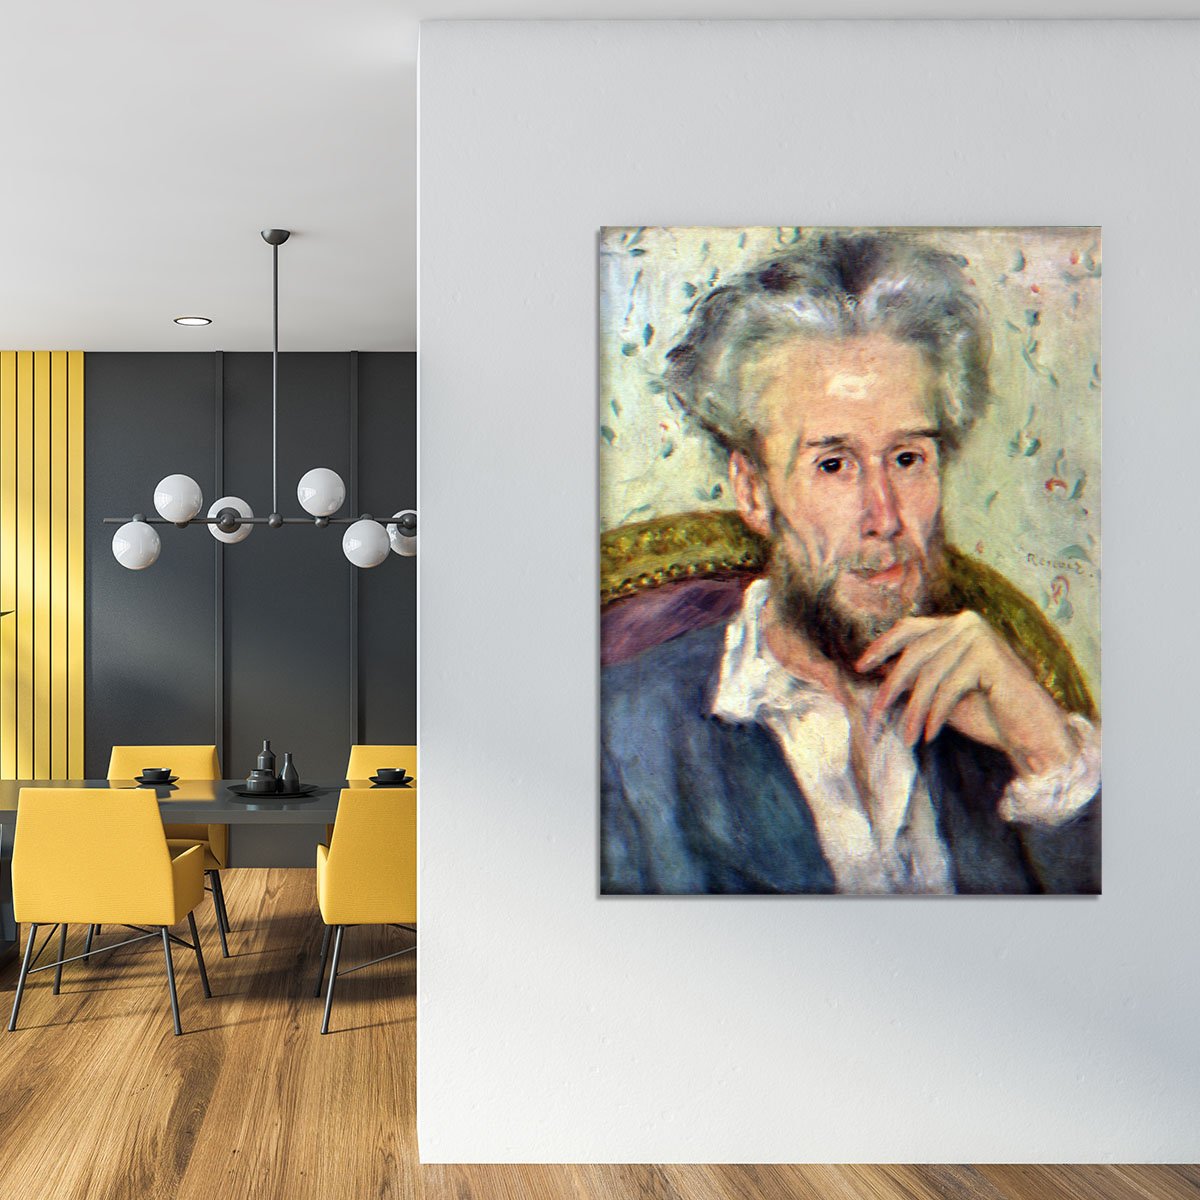 Portait of Victor Chocquet 2 by Renoir Canvas Print or Poster